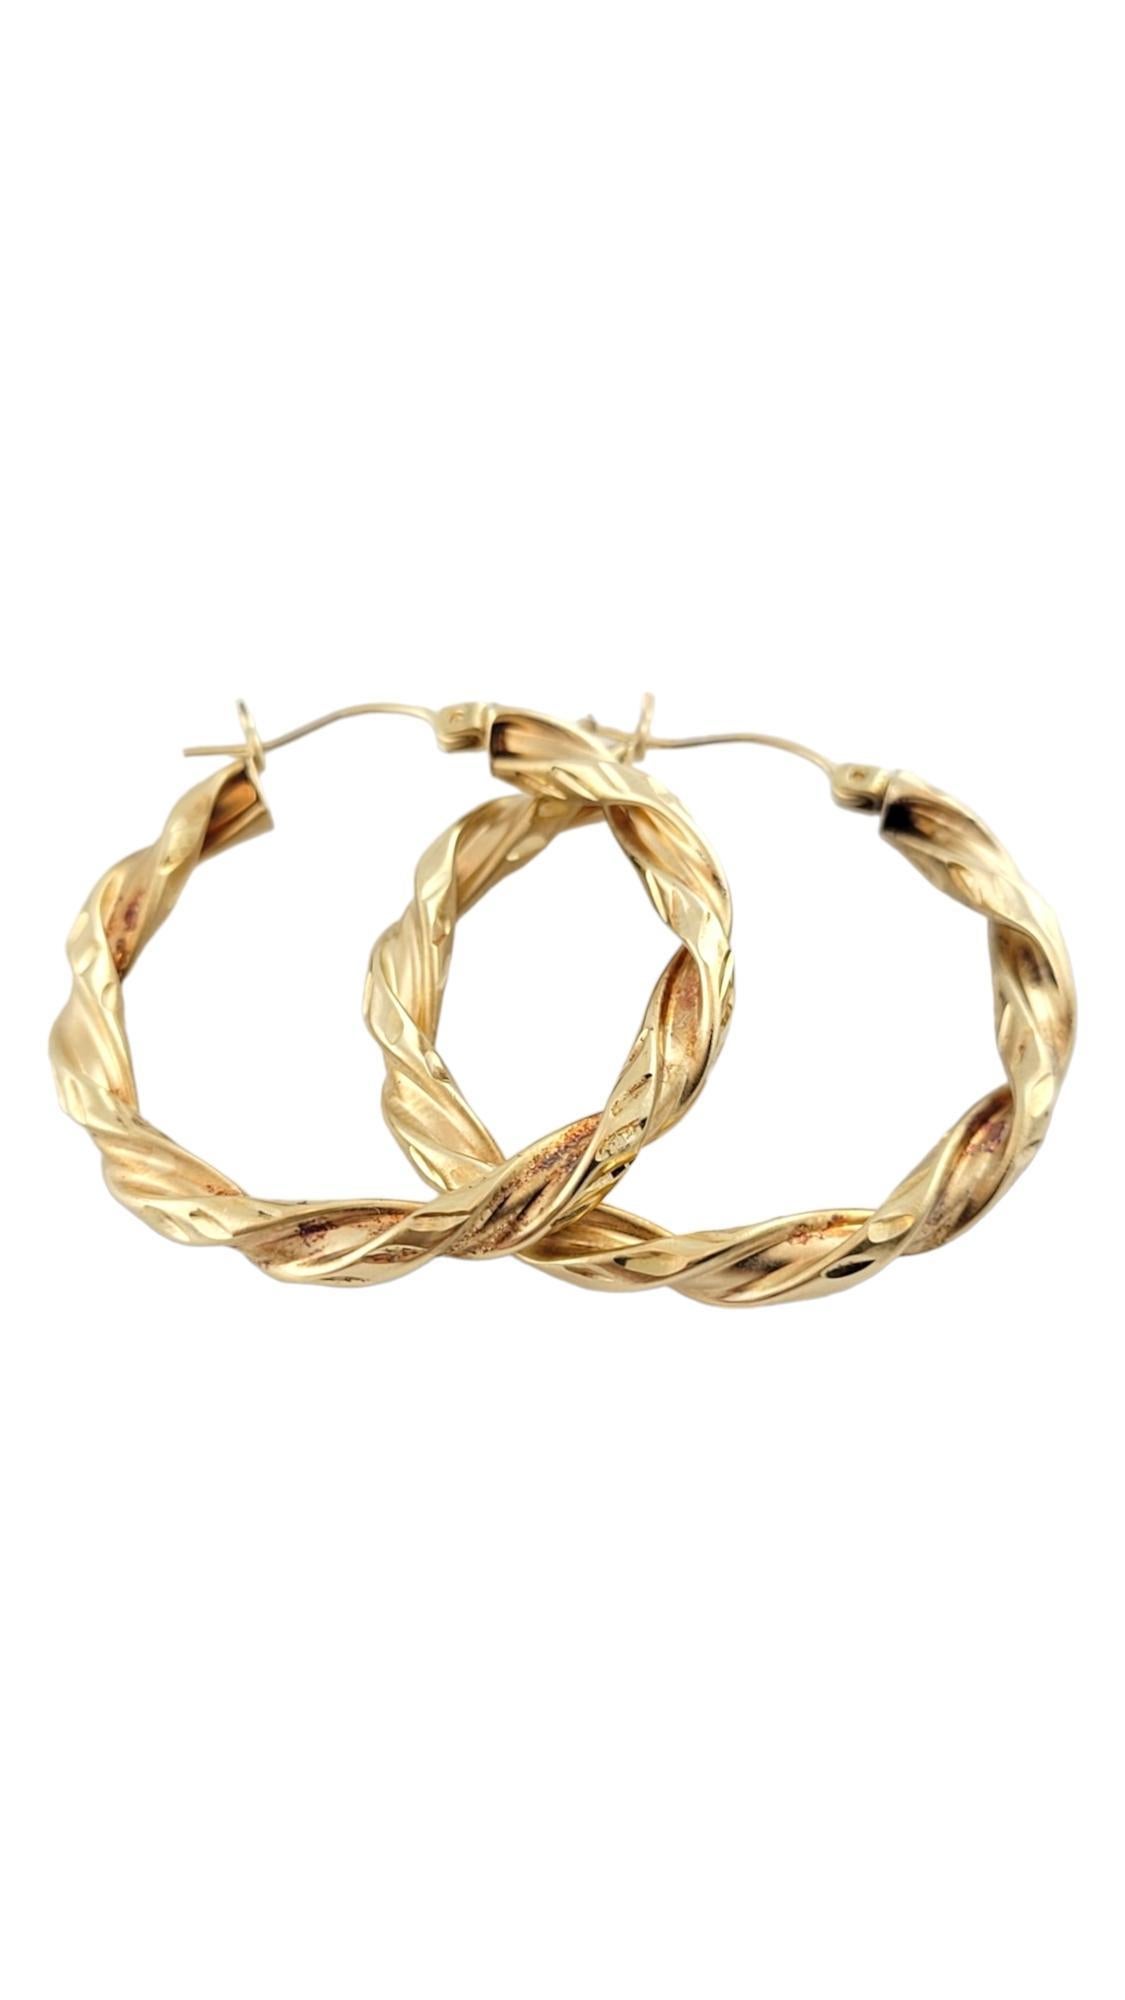 Vintage 14K Yellow Gold Twisted Hoop Earrings

This gorgeous set of 14K gold hoop earrings are in a beautiful, twisted design!

Diameter: 33.55mm
Width: 4.0mm

Weight: 4.5 g/ 2.9 dwt

Hallmark: JAW 14K

Very good condition, professionally